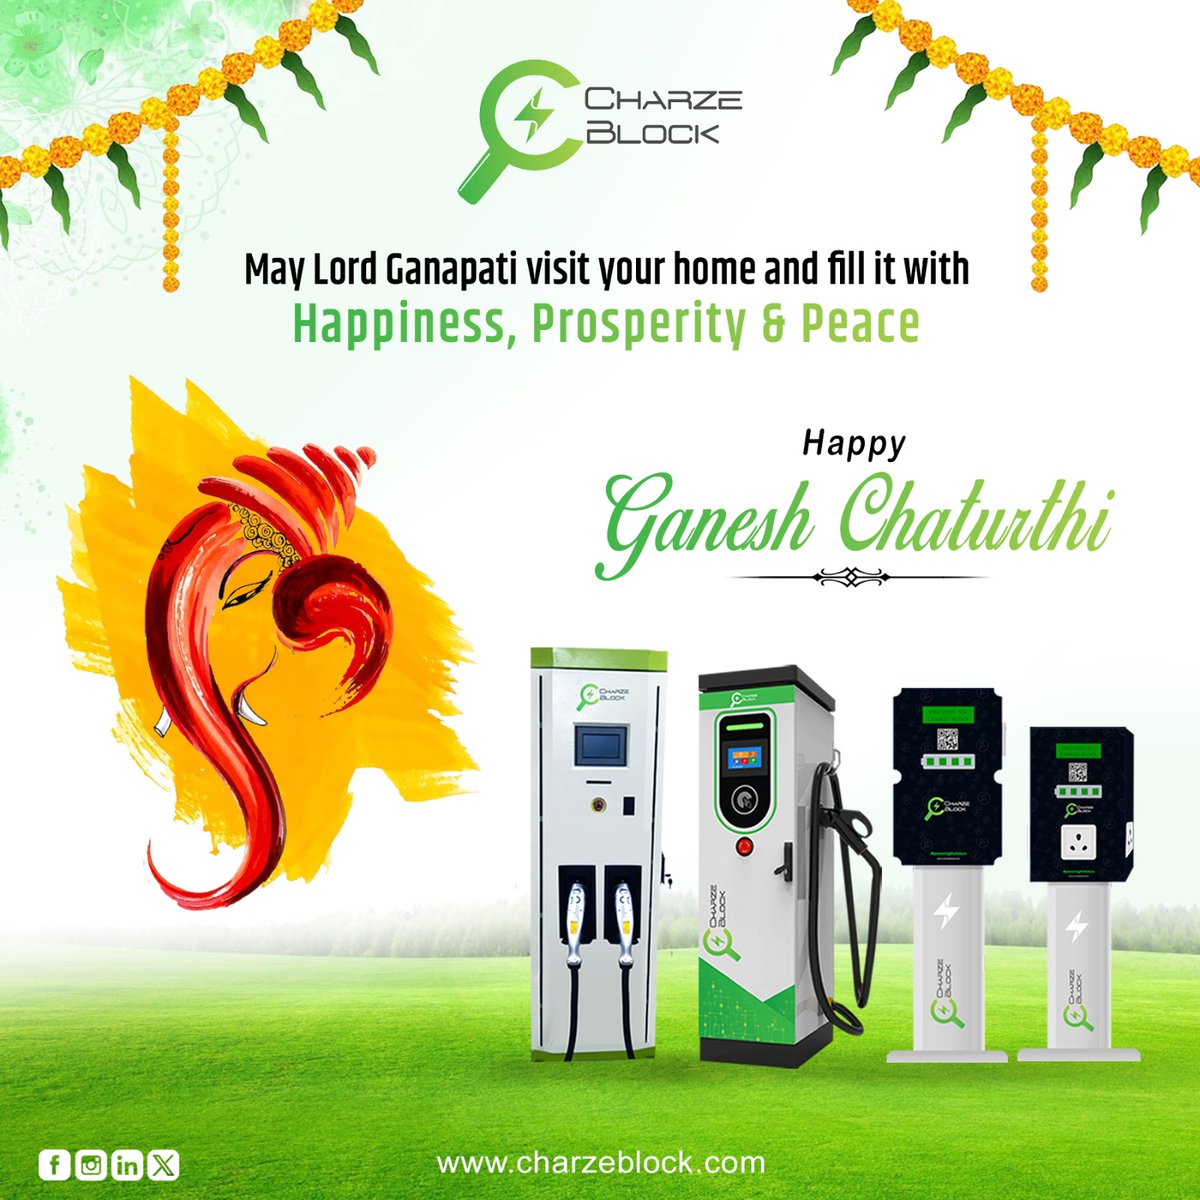 Empowering eco-conscious celebrations this Ganesh Chaturthi with our EV charging stations! 🌿⚡ Let's usher in a sustainable future together. #GreenMobility #EVCharging #SustainableTransport #ChargeBlock #GaneshChaturthi #EcoFriendly #CleanEnergy #GreenCelebrations